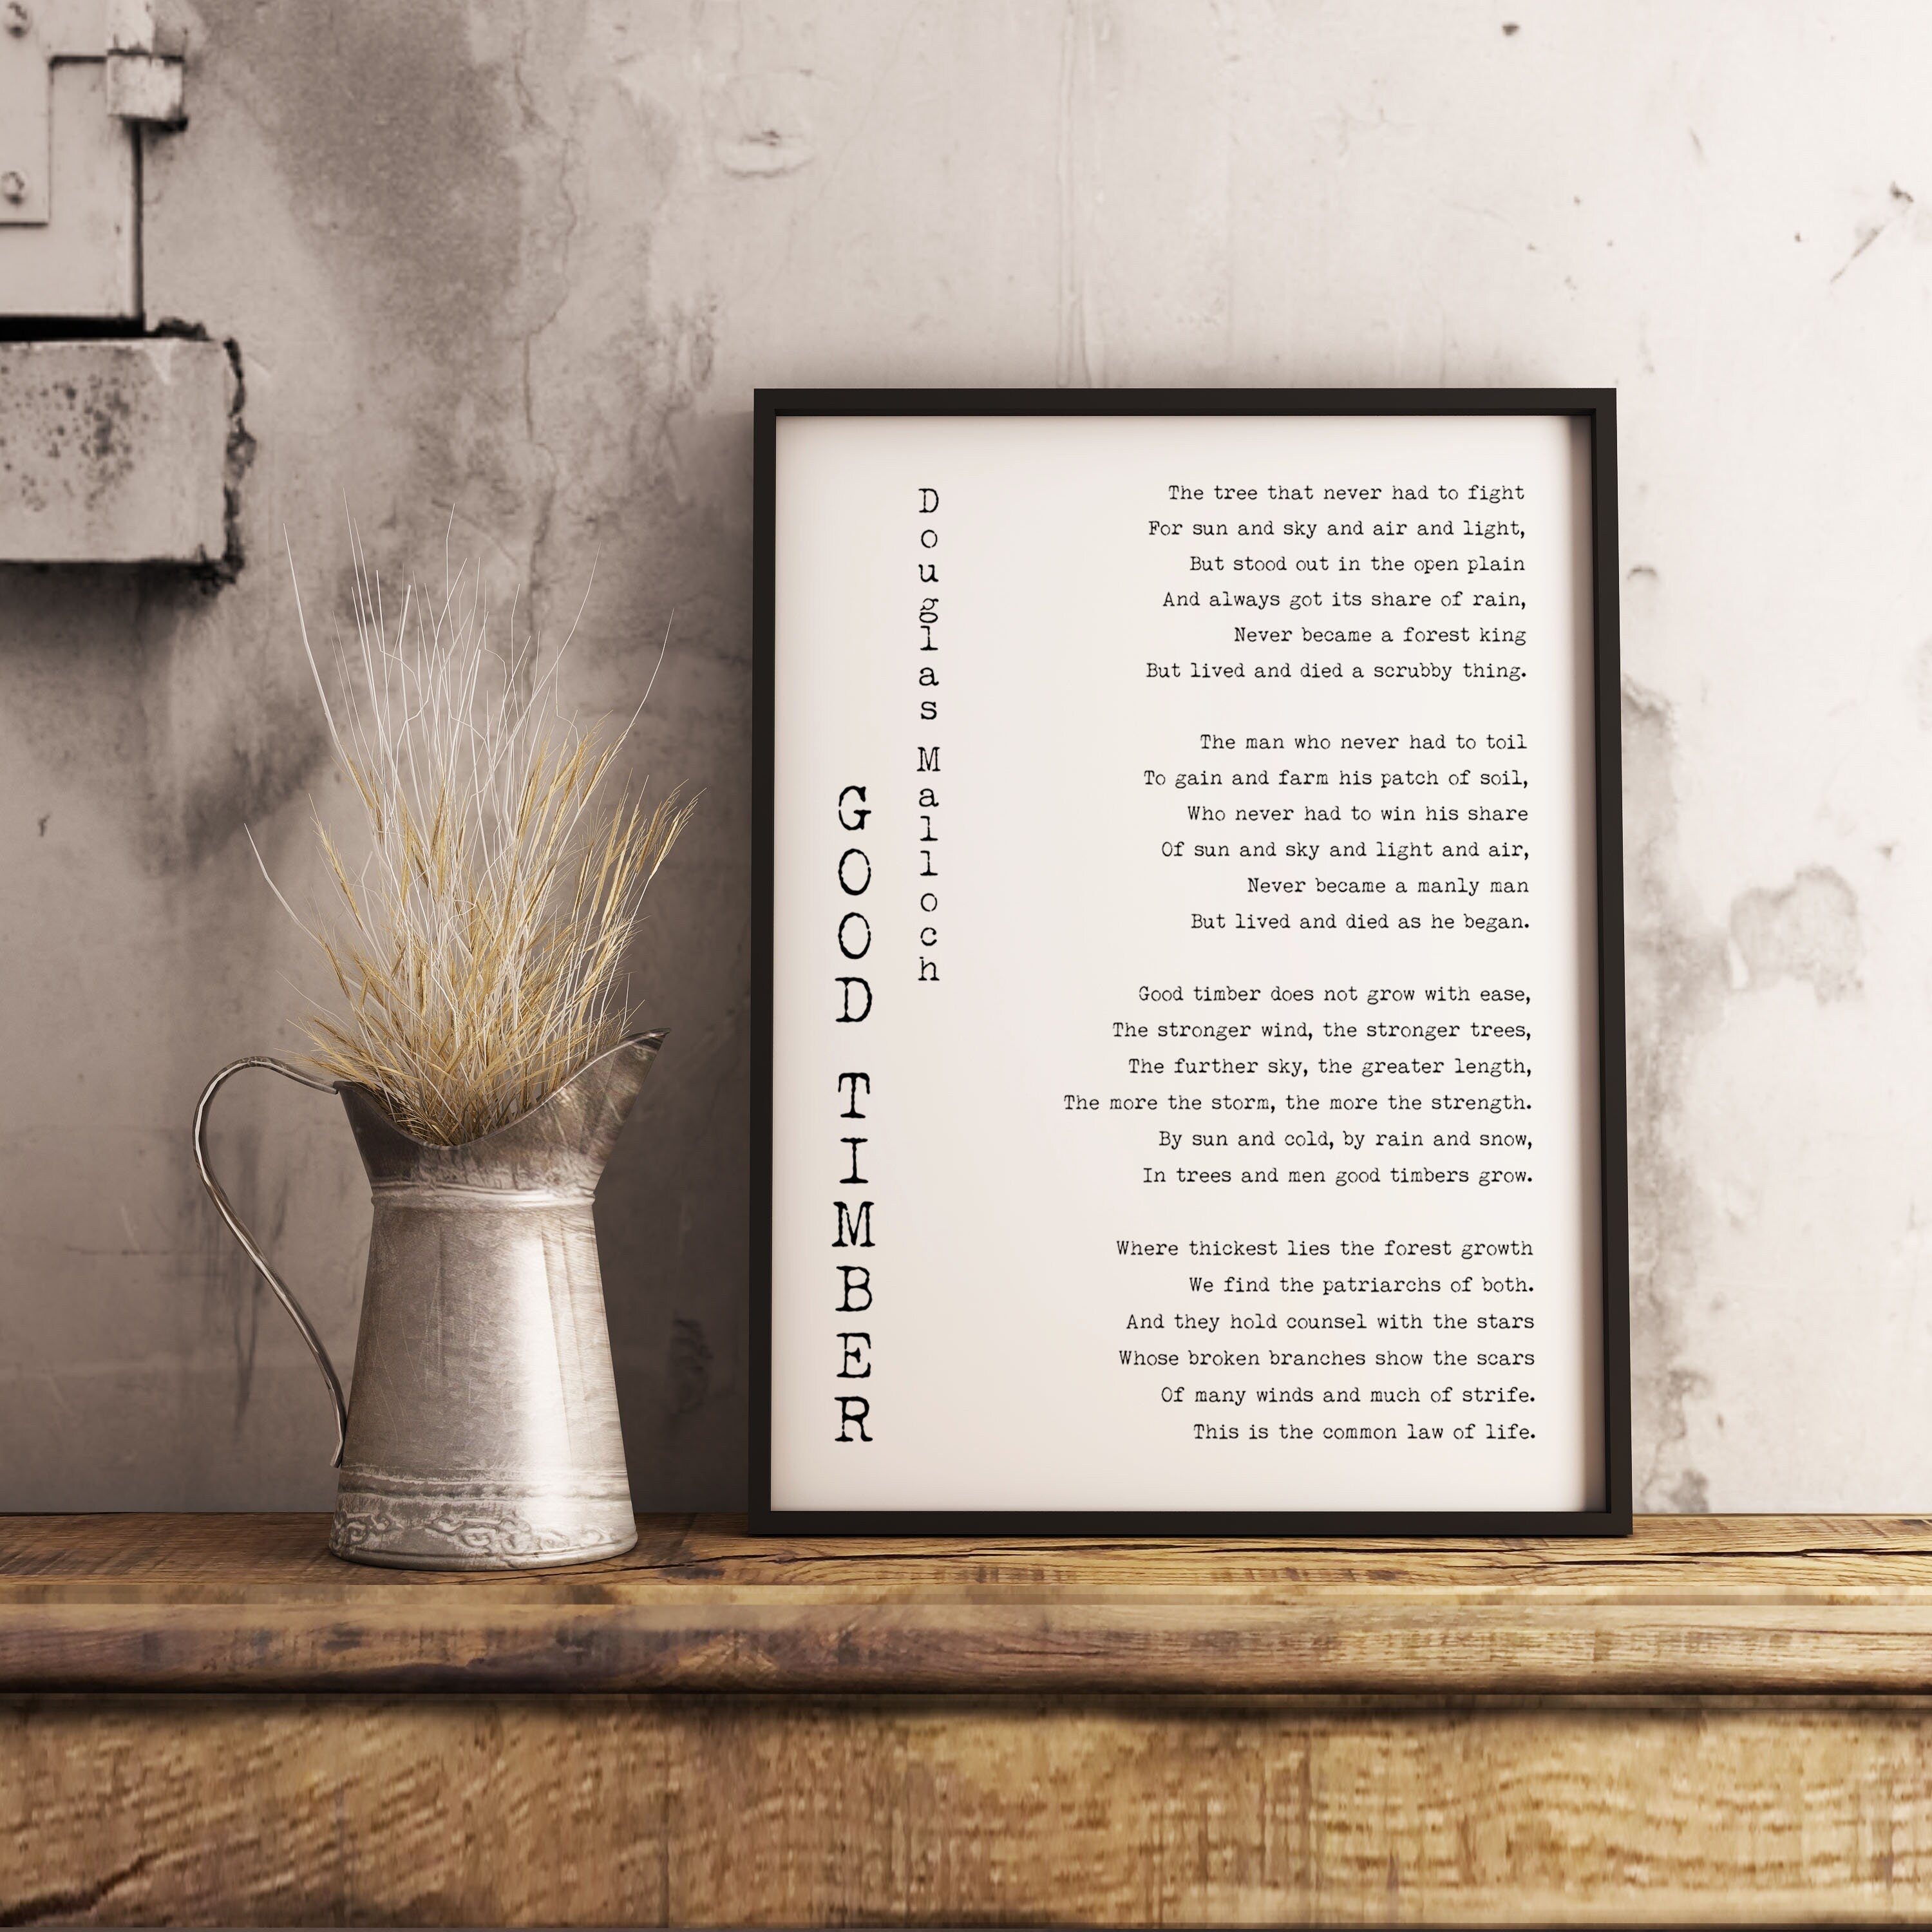 Good Timber FRAMED Wall Art Poem Print for Mormon LDS Gift FRAMED Wall Art Prints, Inspirational Quote Black & White Wall Decor